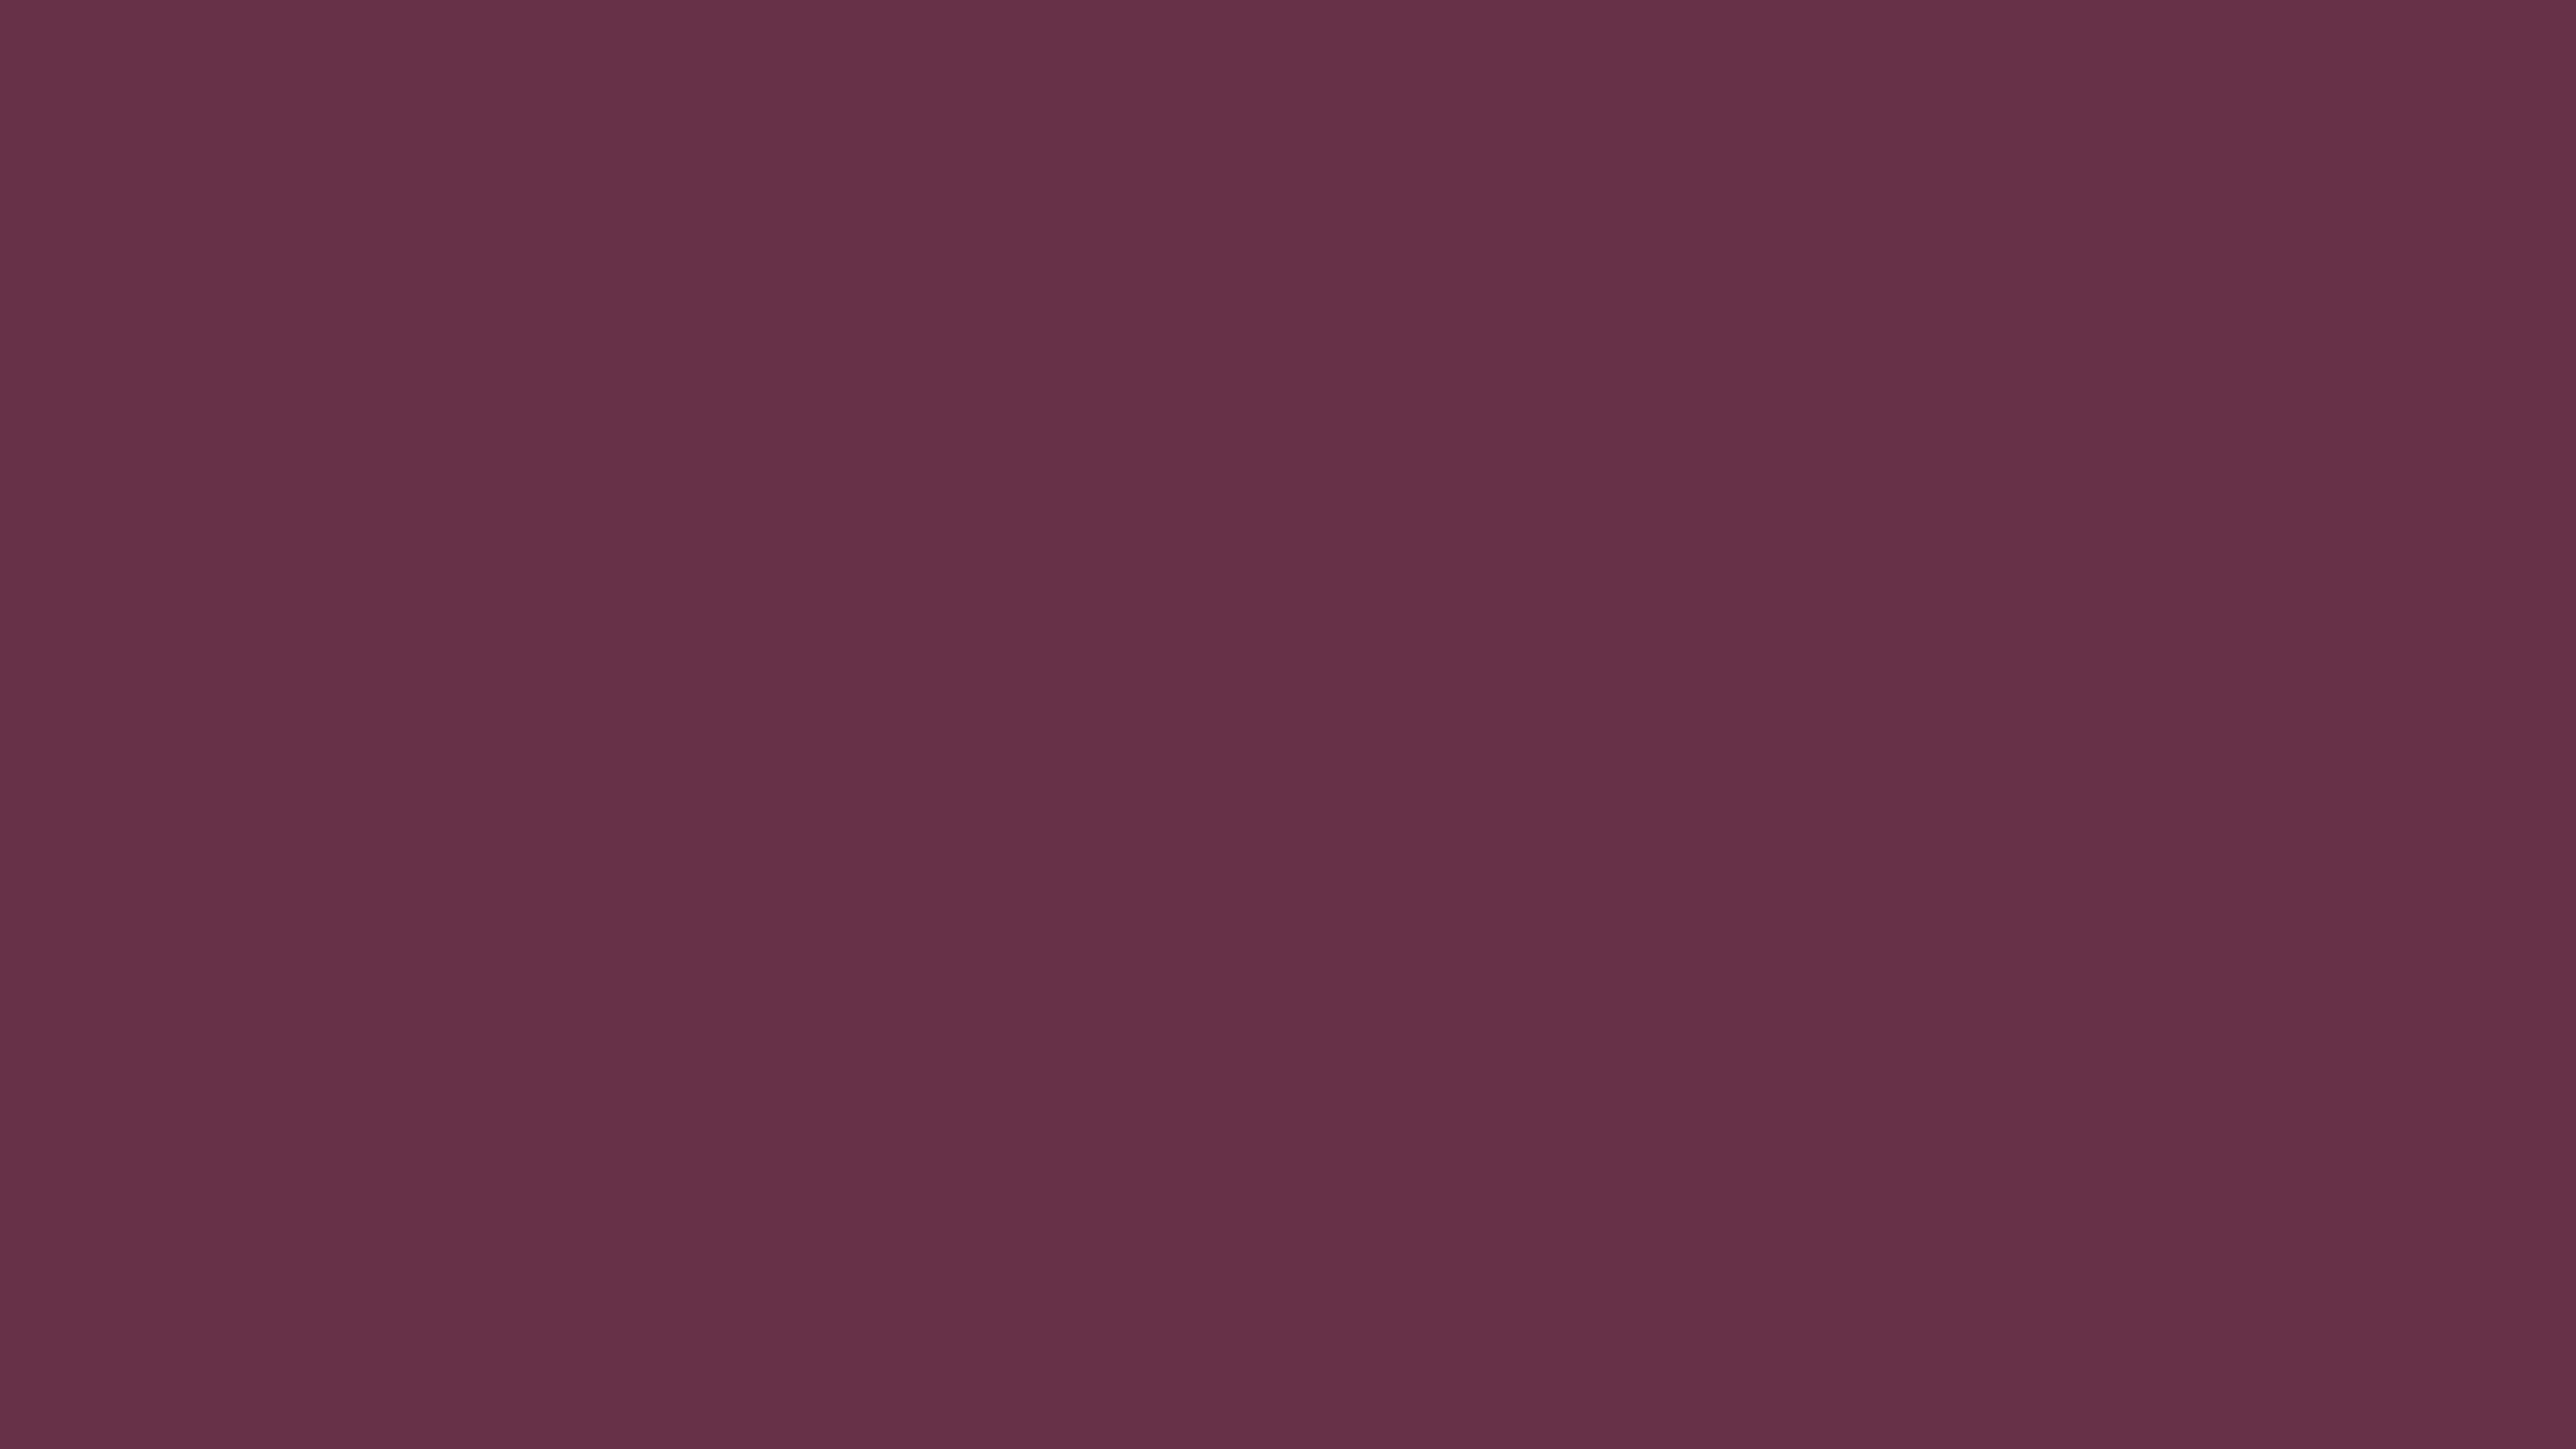 3840x2160 Old Mauve Solid Color Background